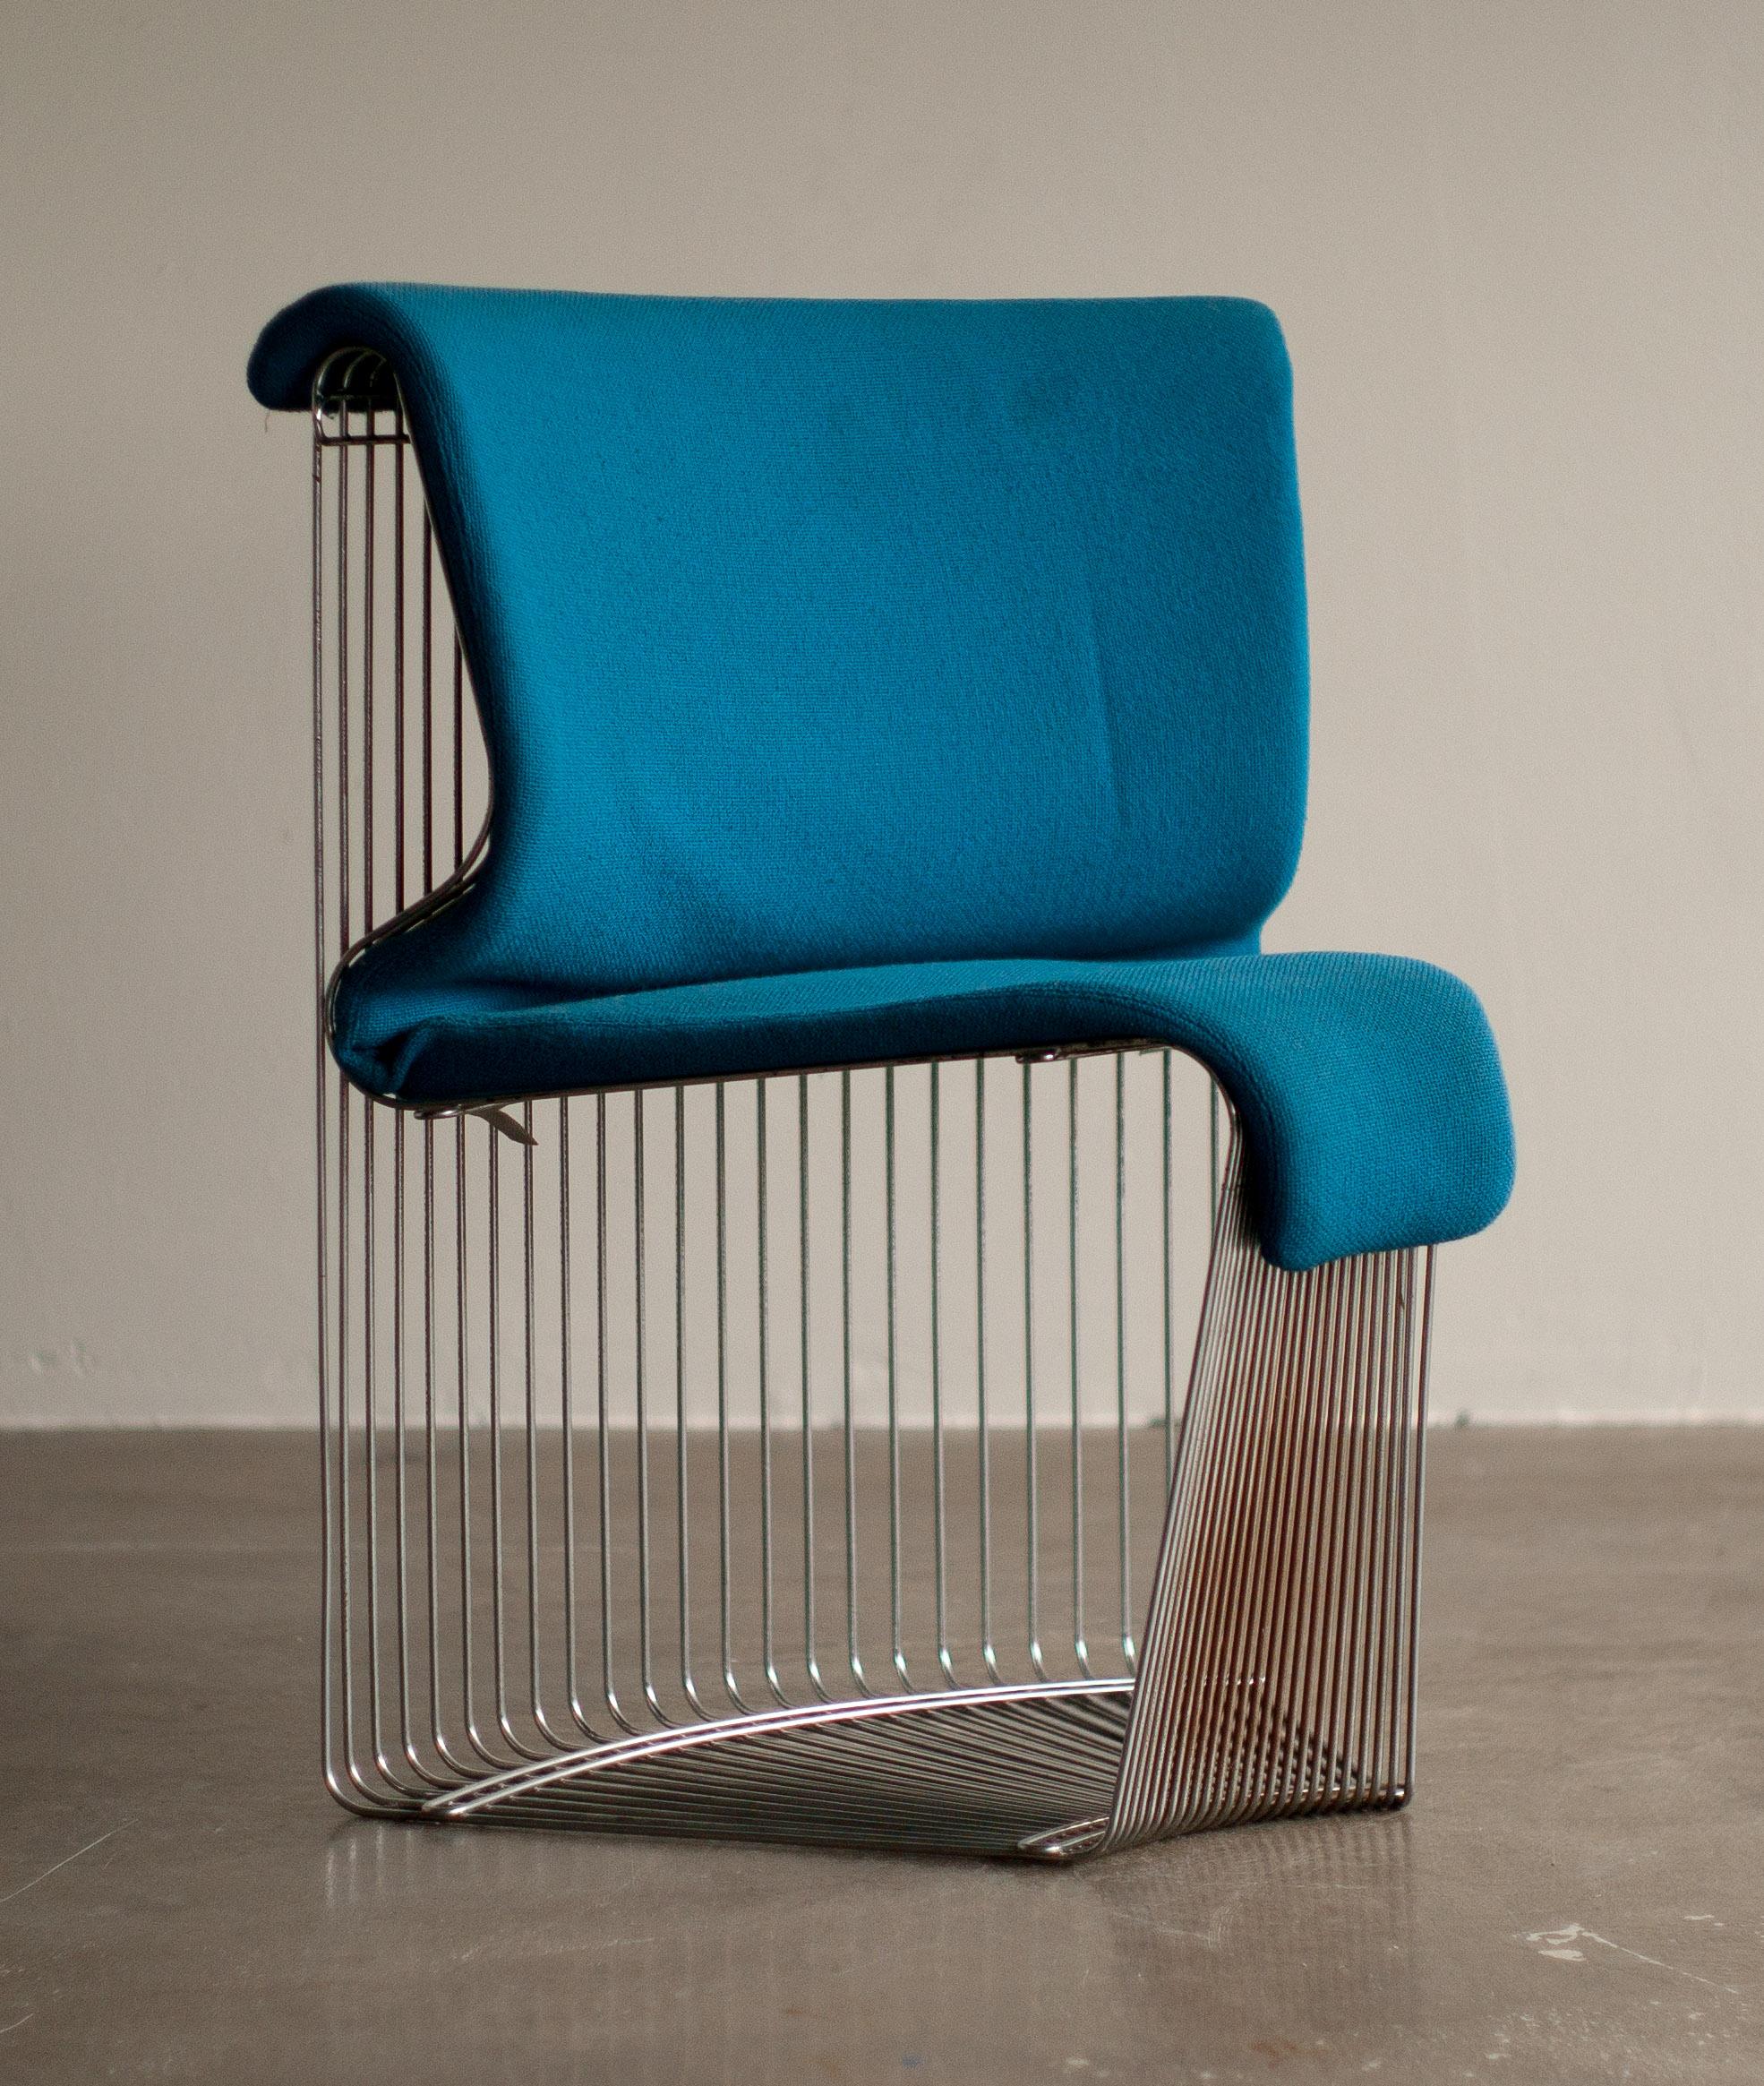 Iconic Verner Panton design in chrome-plated steel wire, original upholstery in good condition.